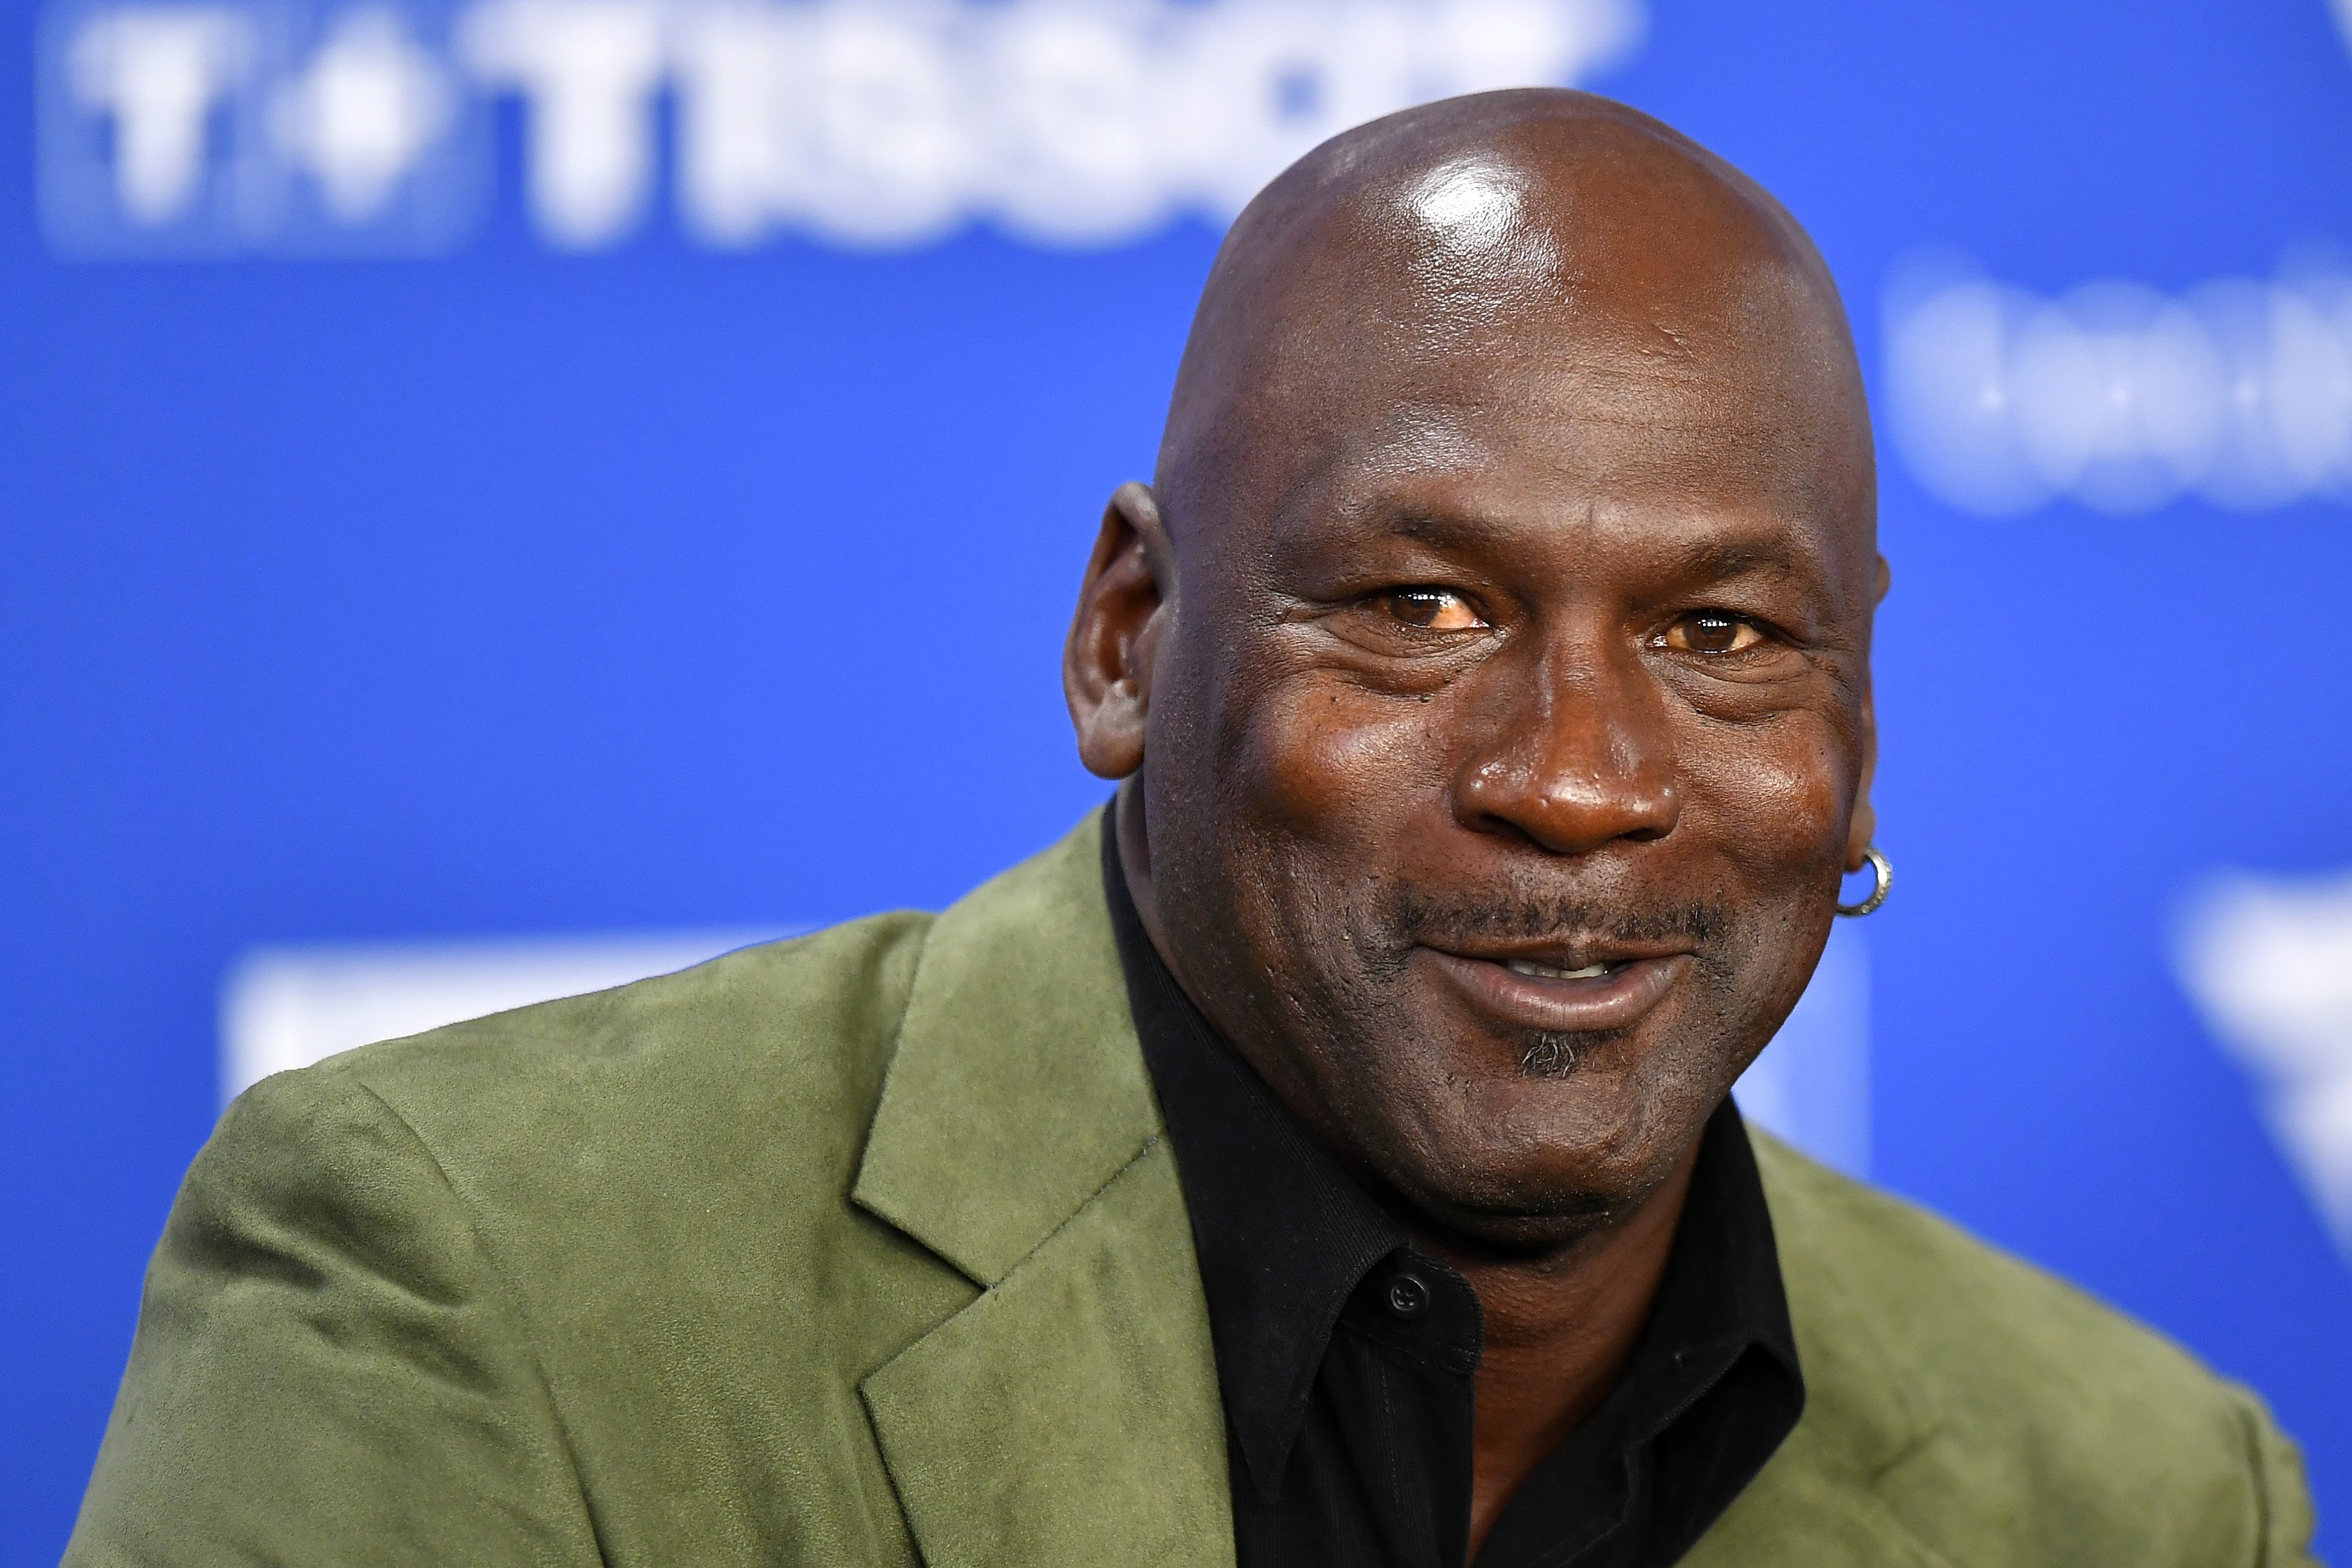 Michael Jordan attends a press conference before the NBA Paris Game match between Charlotte Hornets and Milwaukee Bucks on January 24, 2020. | Photo: Getty Images